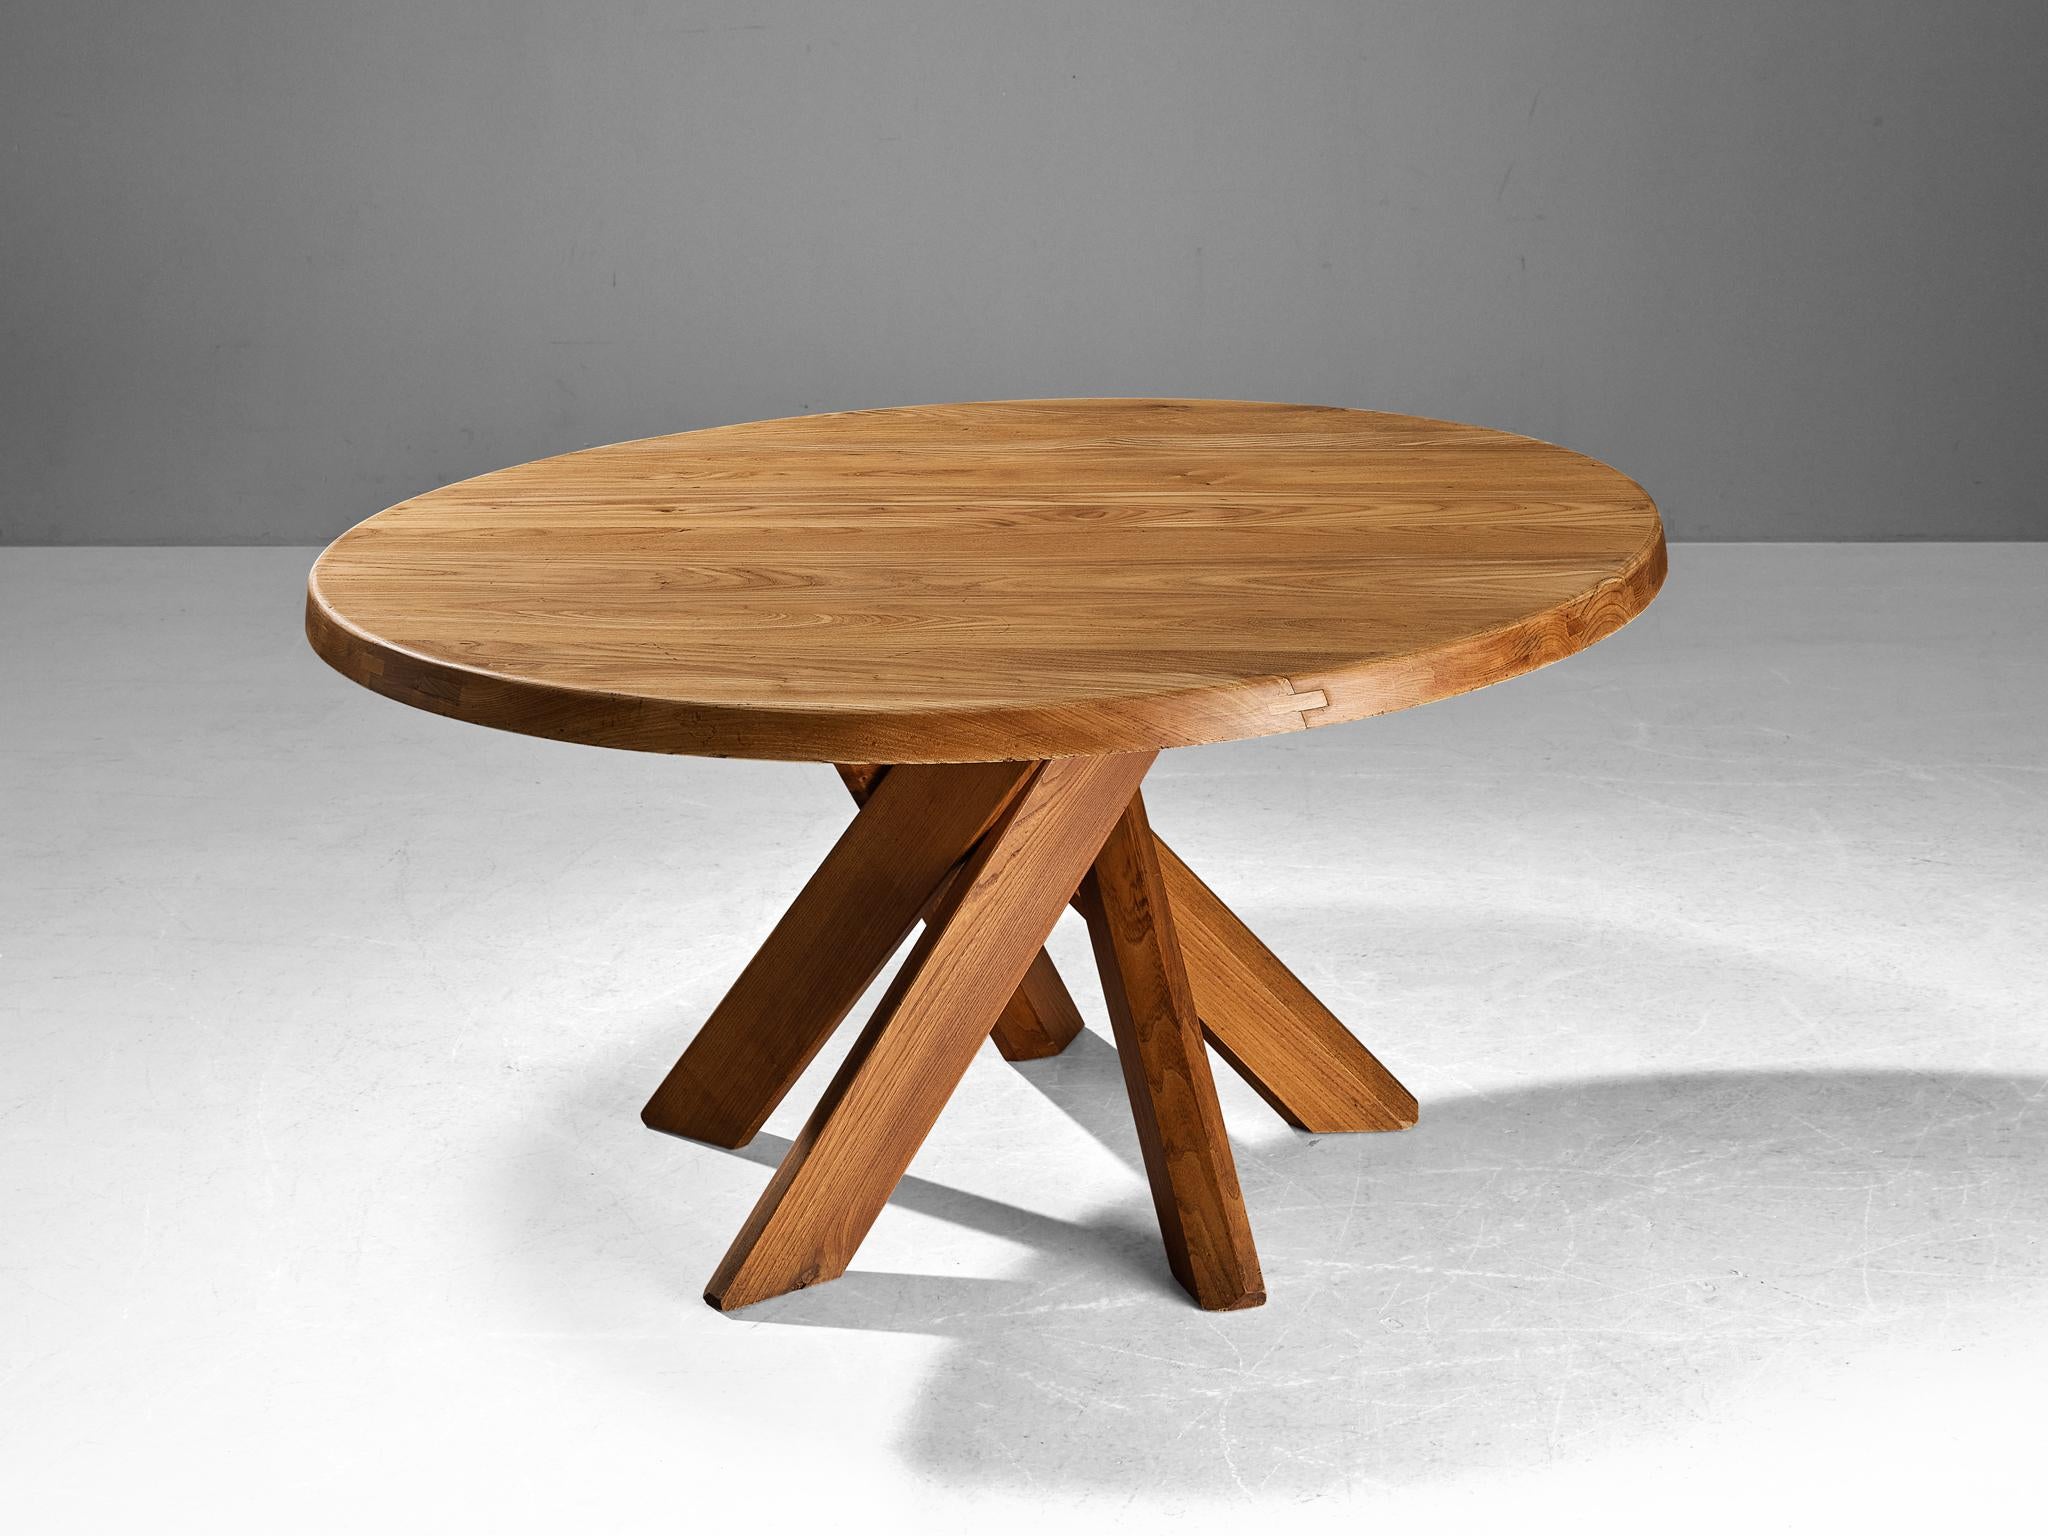 Pierre Chapo, dining table model 'T21D', elm, France, 1973

This design is an early edition, created according to the original craft methodology of Pierre Chapo. This round 'T21D' dining table is designed by Pierre Chapo and its table top has a